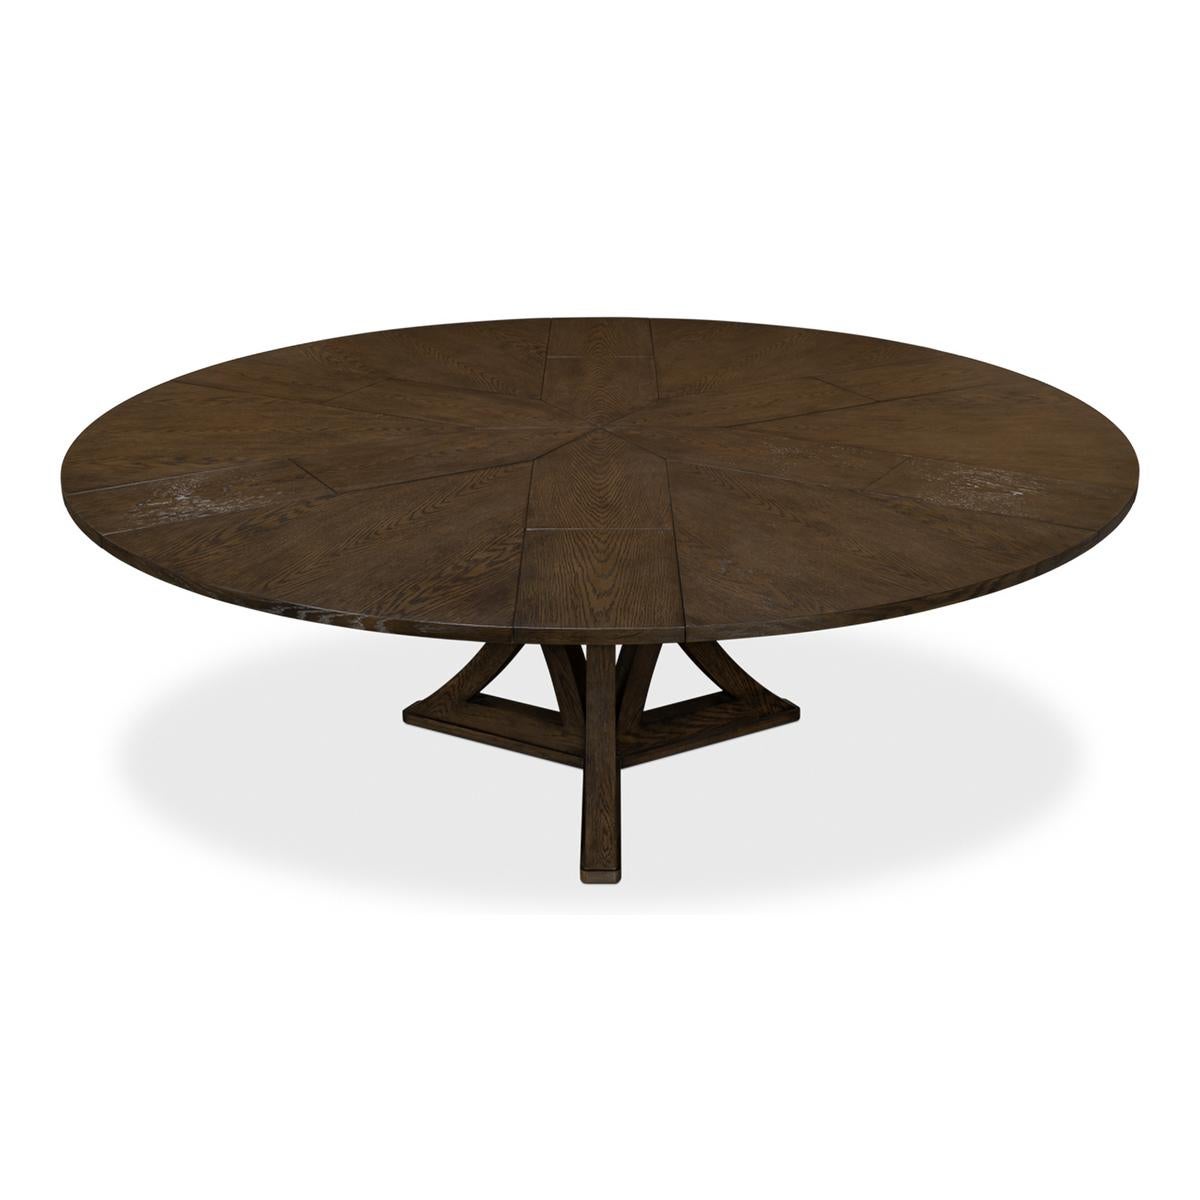 Wood Rustic Round Dining Table, Artisan Grey For Sale